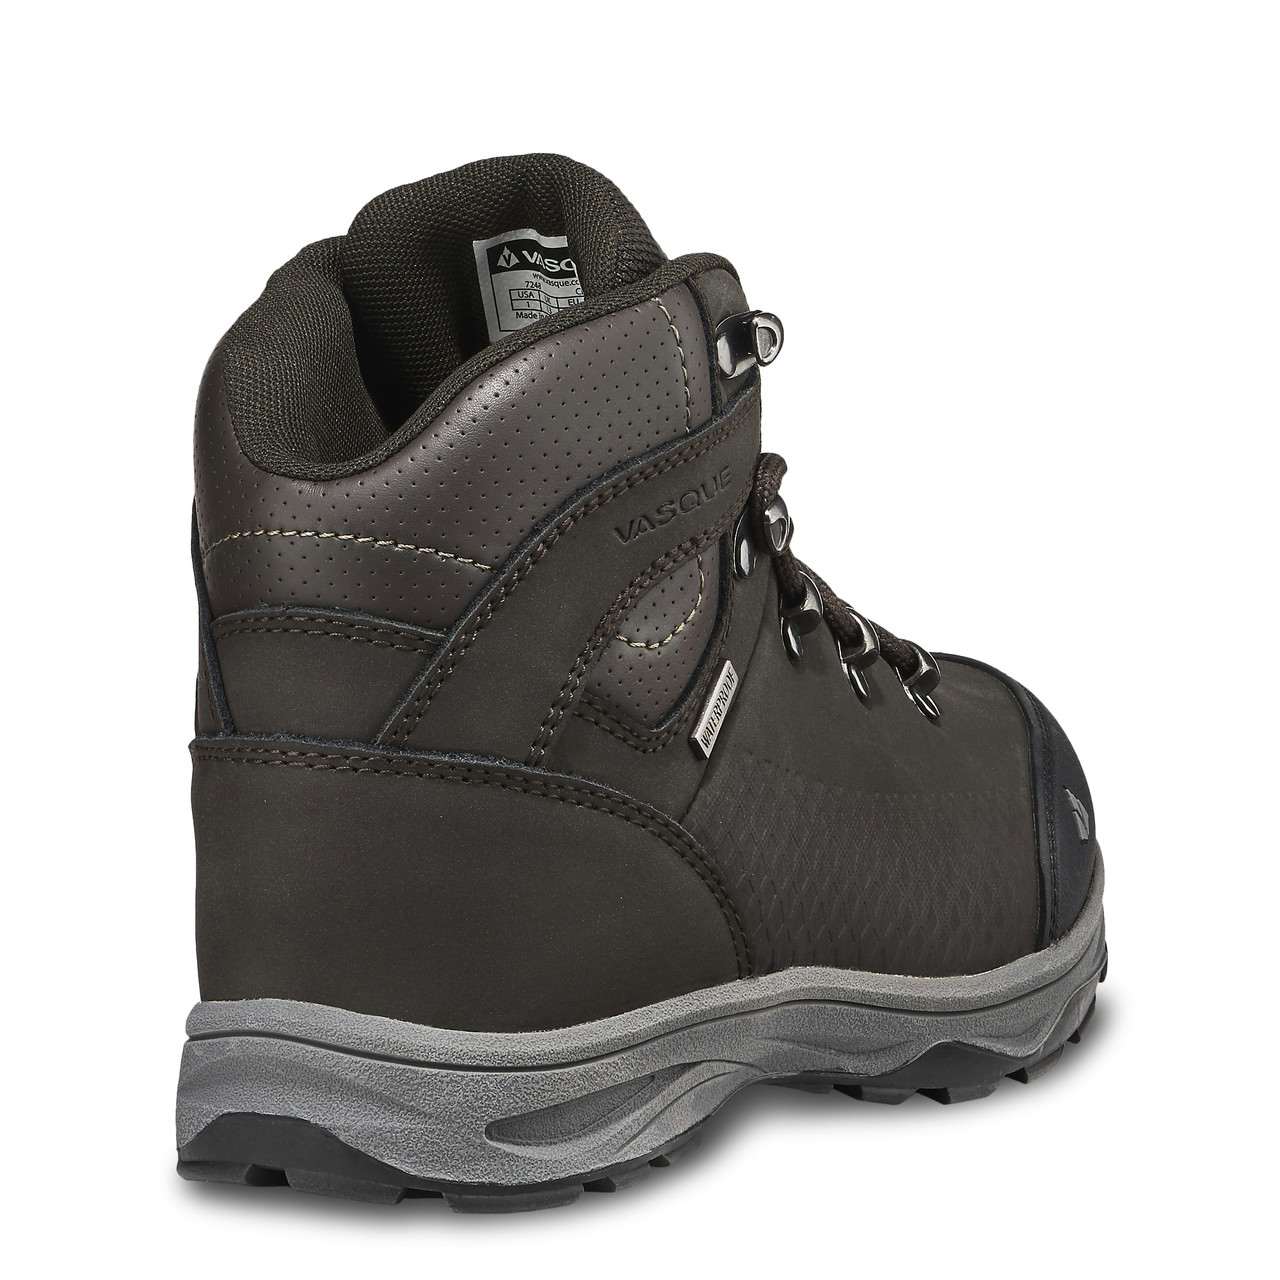 St Elias Ultradry Boots Bungee Cord